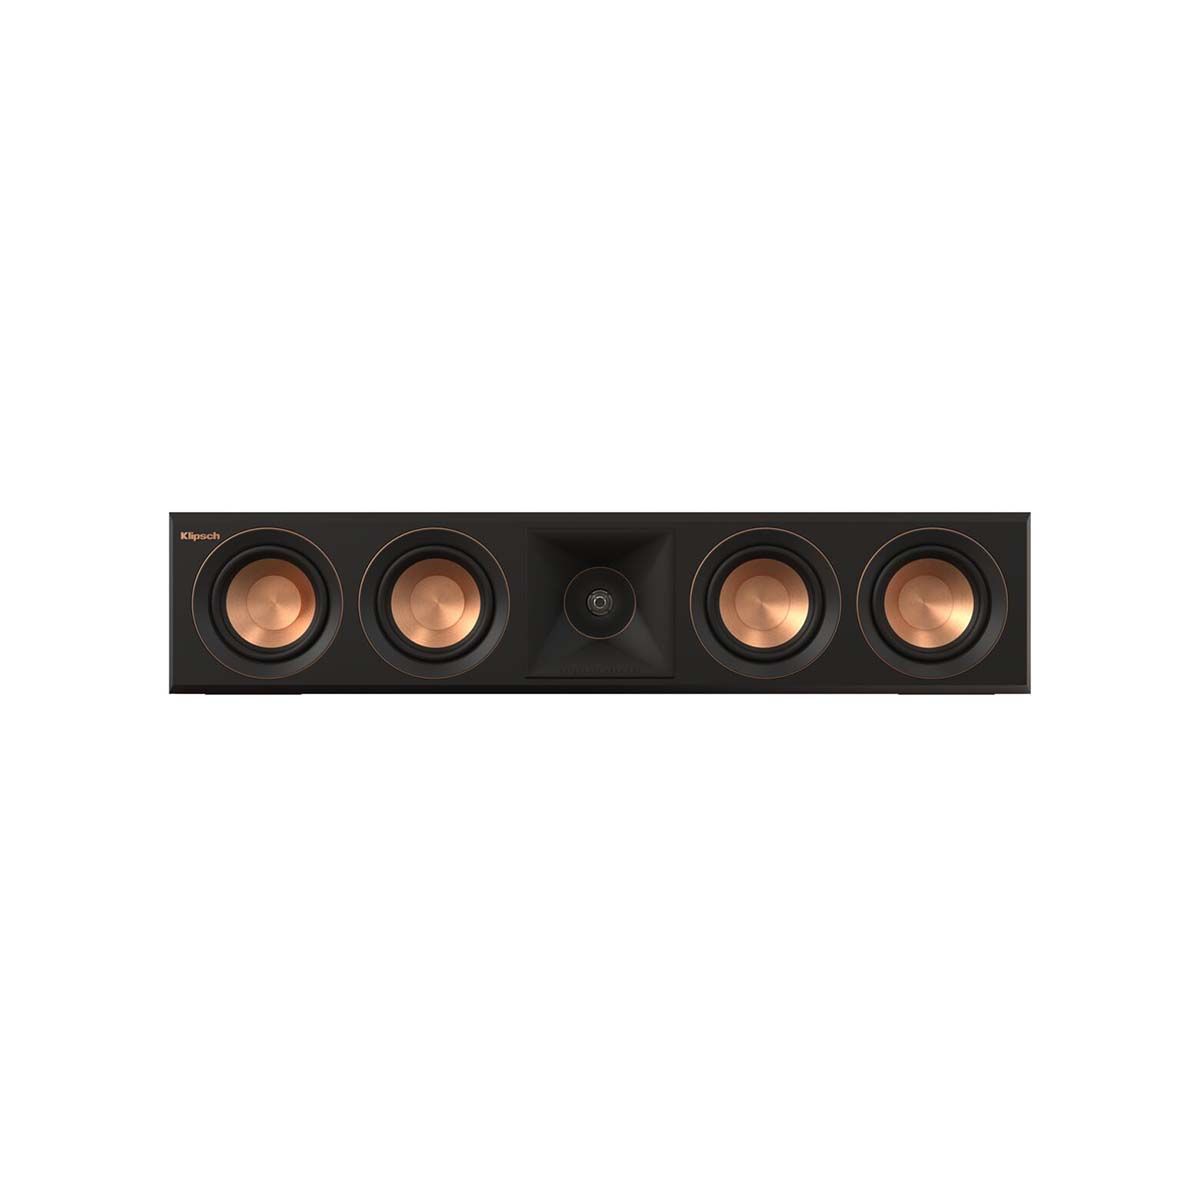 Klipsch RP-404C II Center Channel Speaker - Ebony - front view without grill